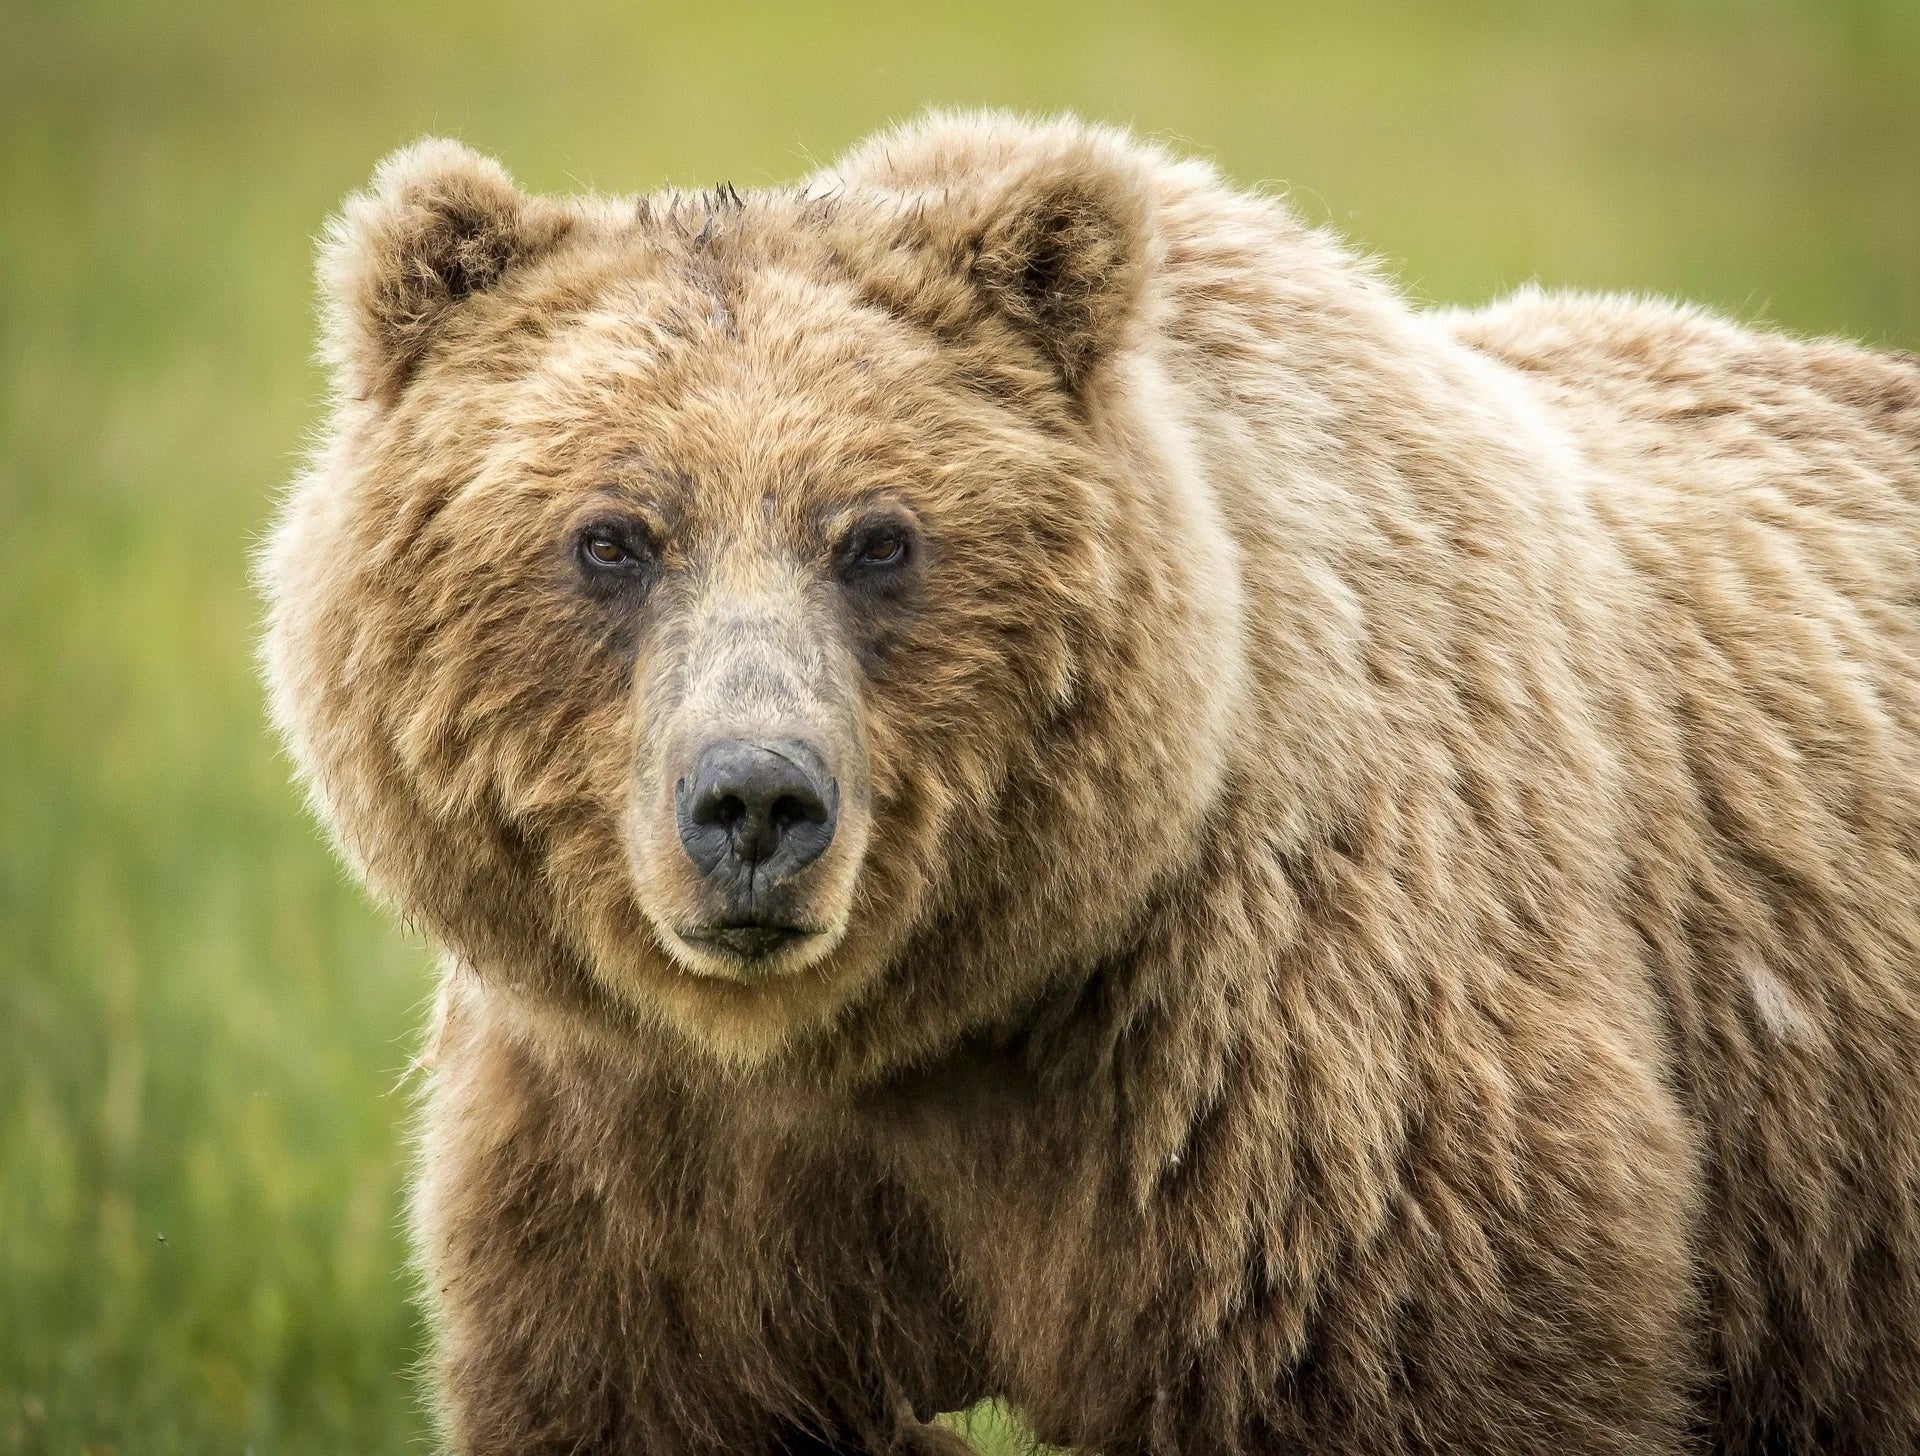 Adult grizzly bear looking directly at camera